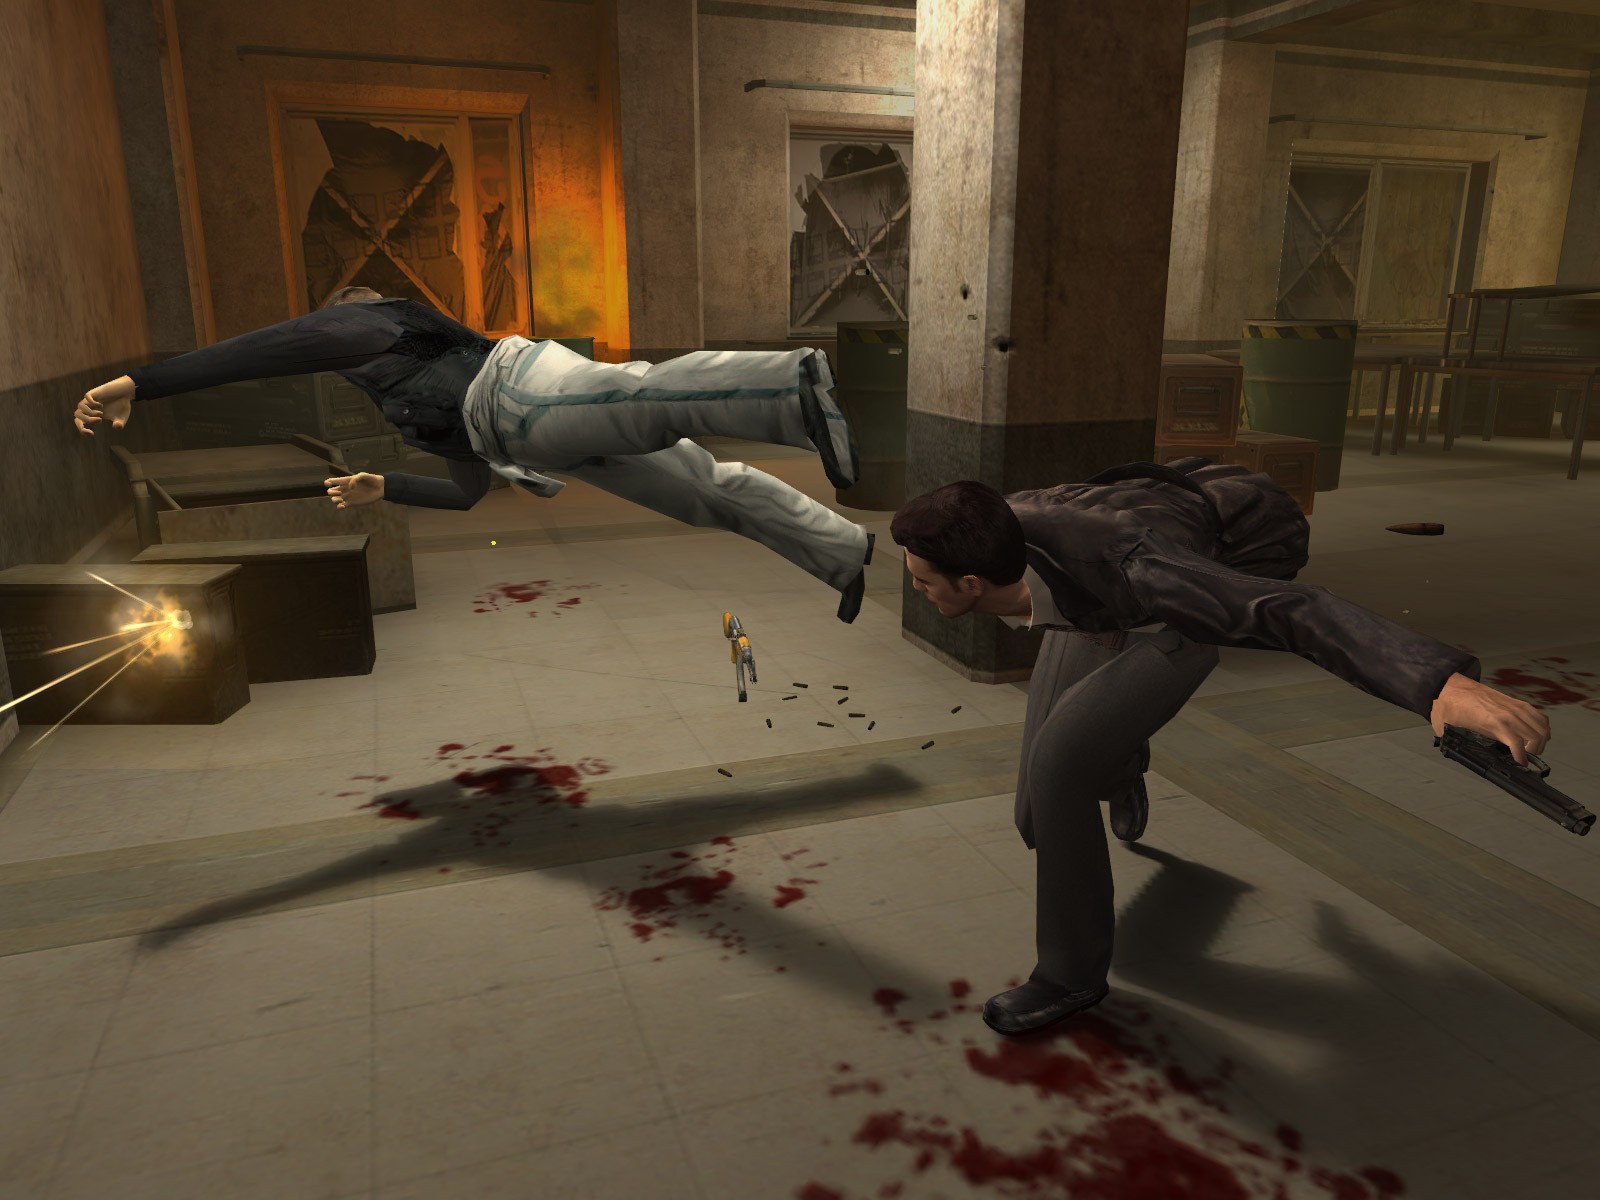 how long is max payne 2